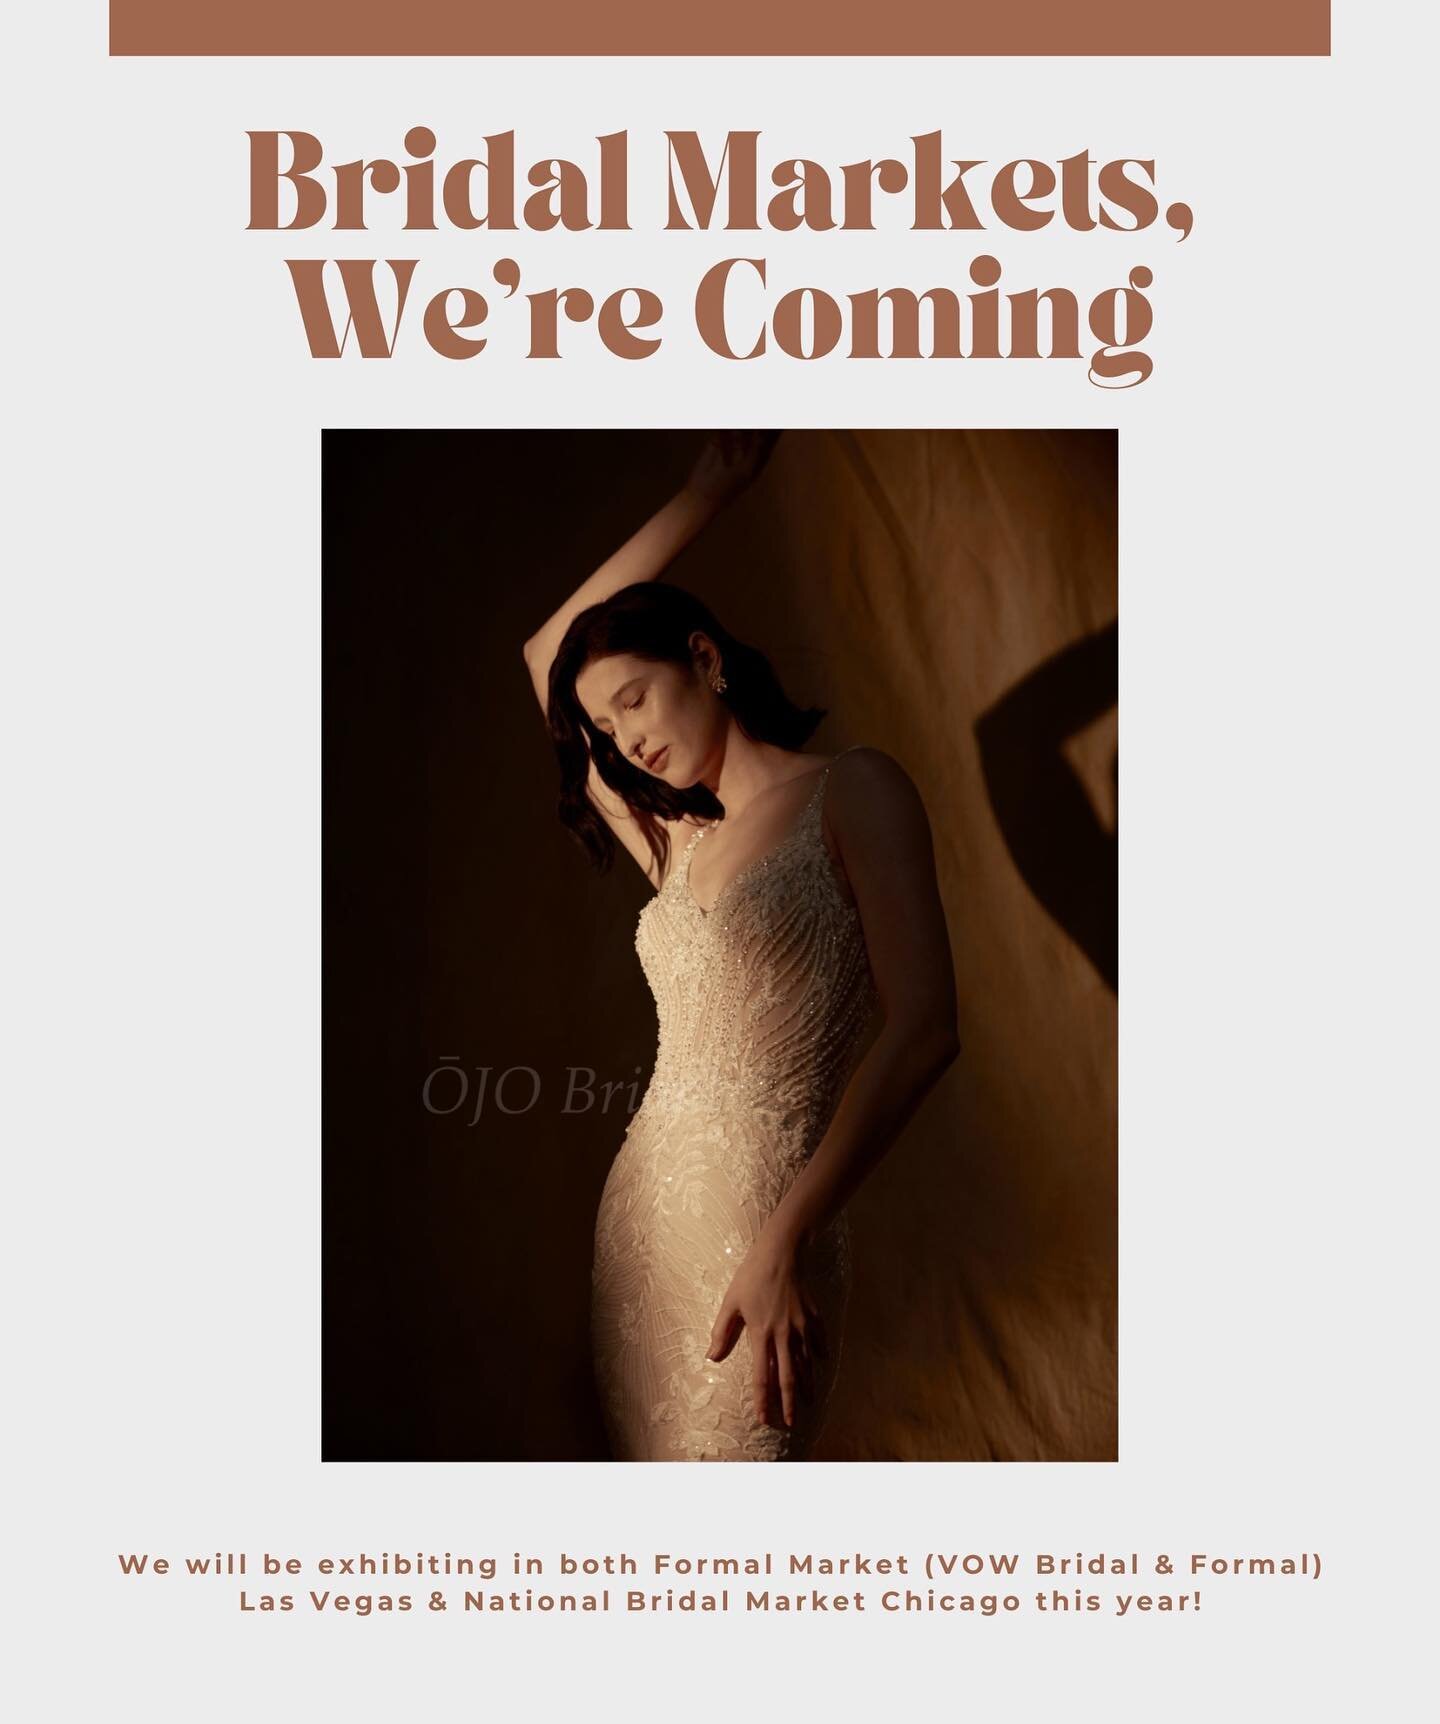 See you there?
Book appointment at the link in our bio. 💖 
@nationalbridalmarket @apparelmarkets @formalmarkets 
.
.
.
#chicagobridalmarket #bridal #bridalboutique #vowbridalmarket #bridalexpo #bridalmarket